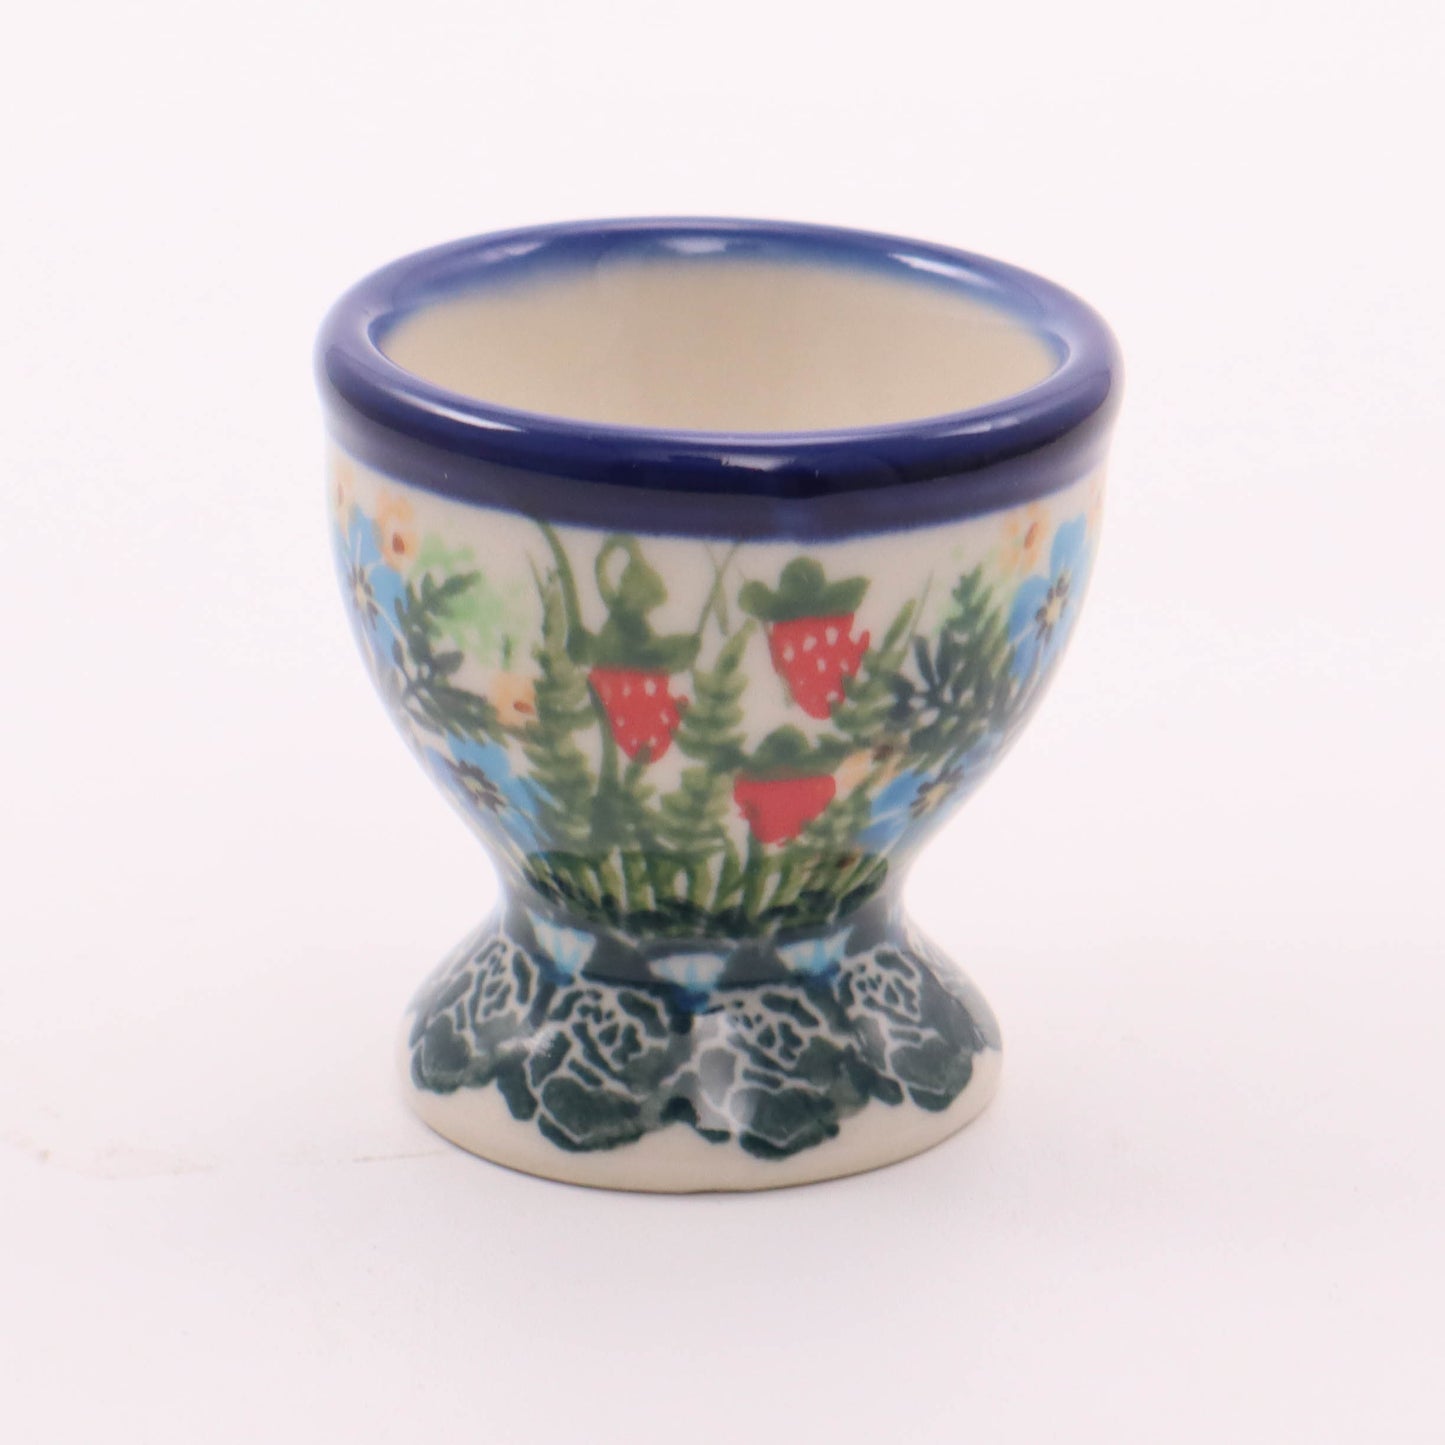 1.5"x2" Egg Cup. Pattern: Strawberry Fields